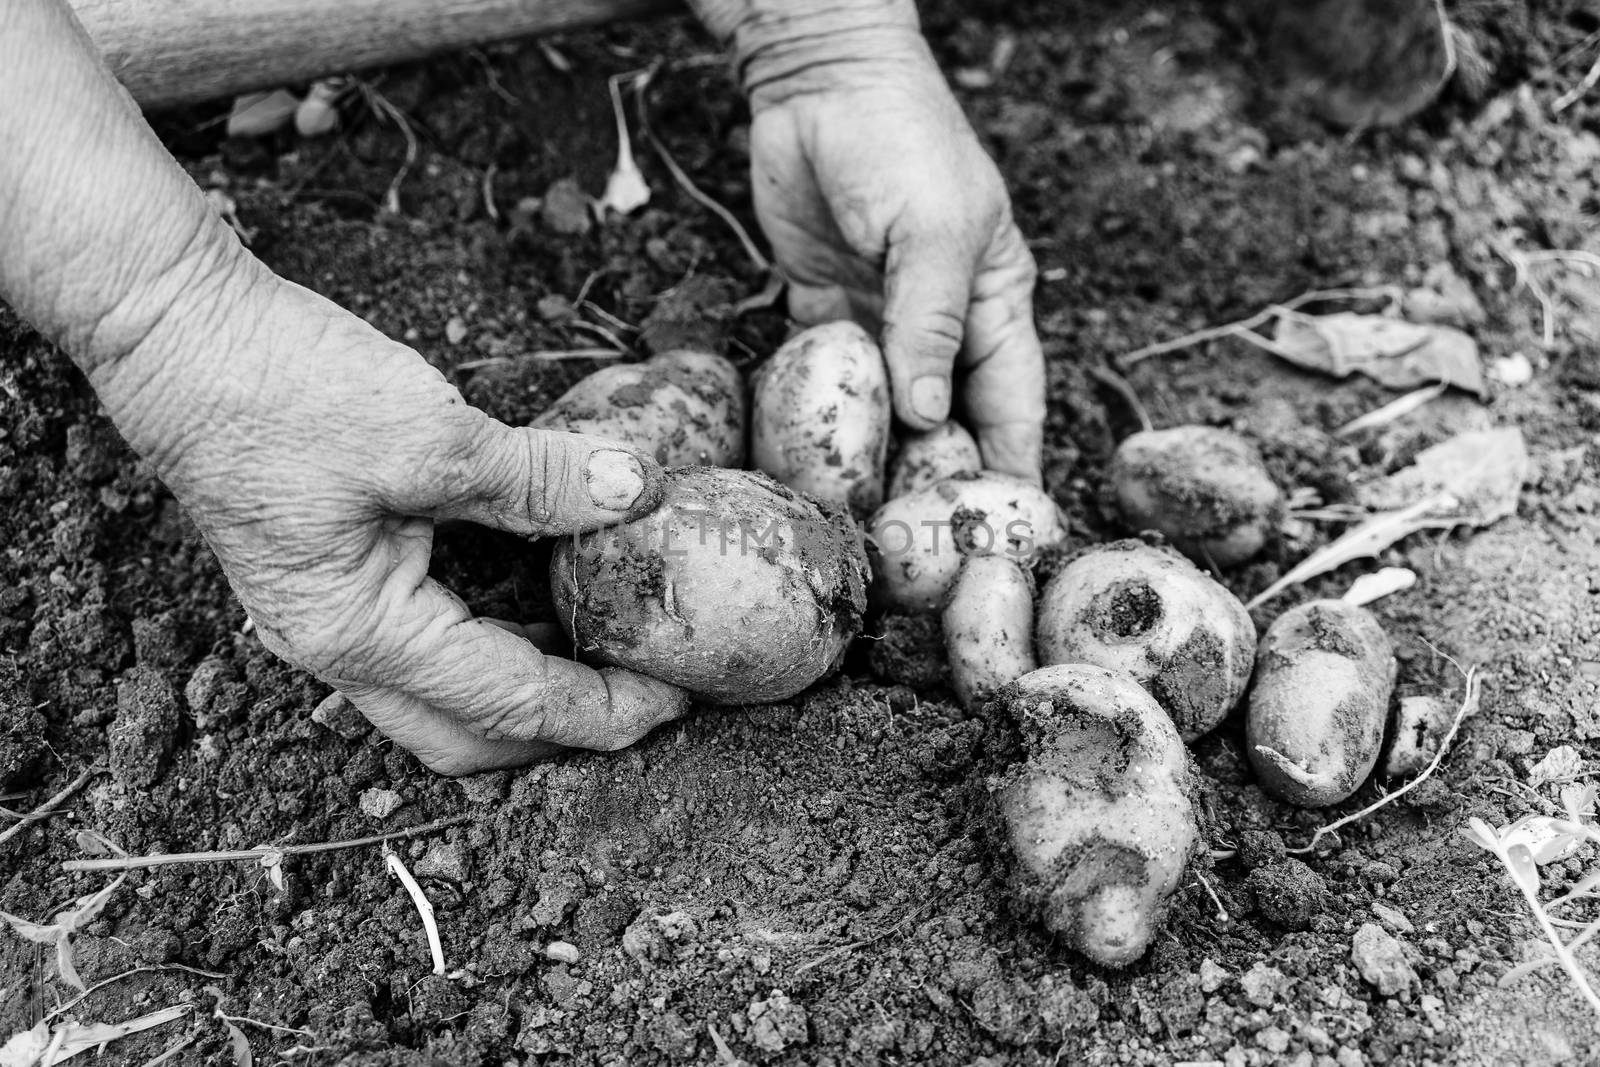 Harvesting and digging potatoes with hoe and hand in garden. Digging organic potatoes by dirty hard worked and wrinkled hand .